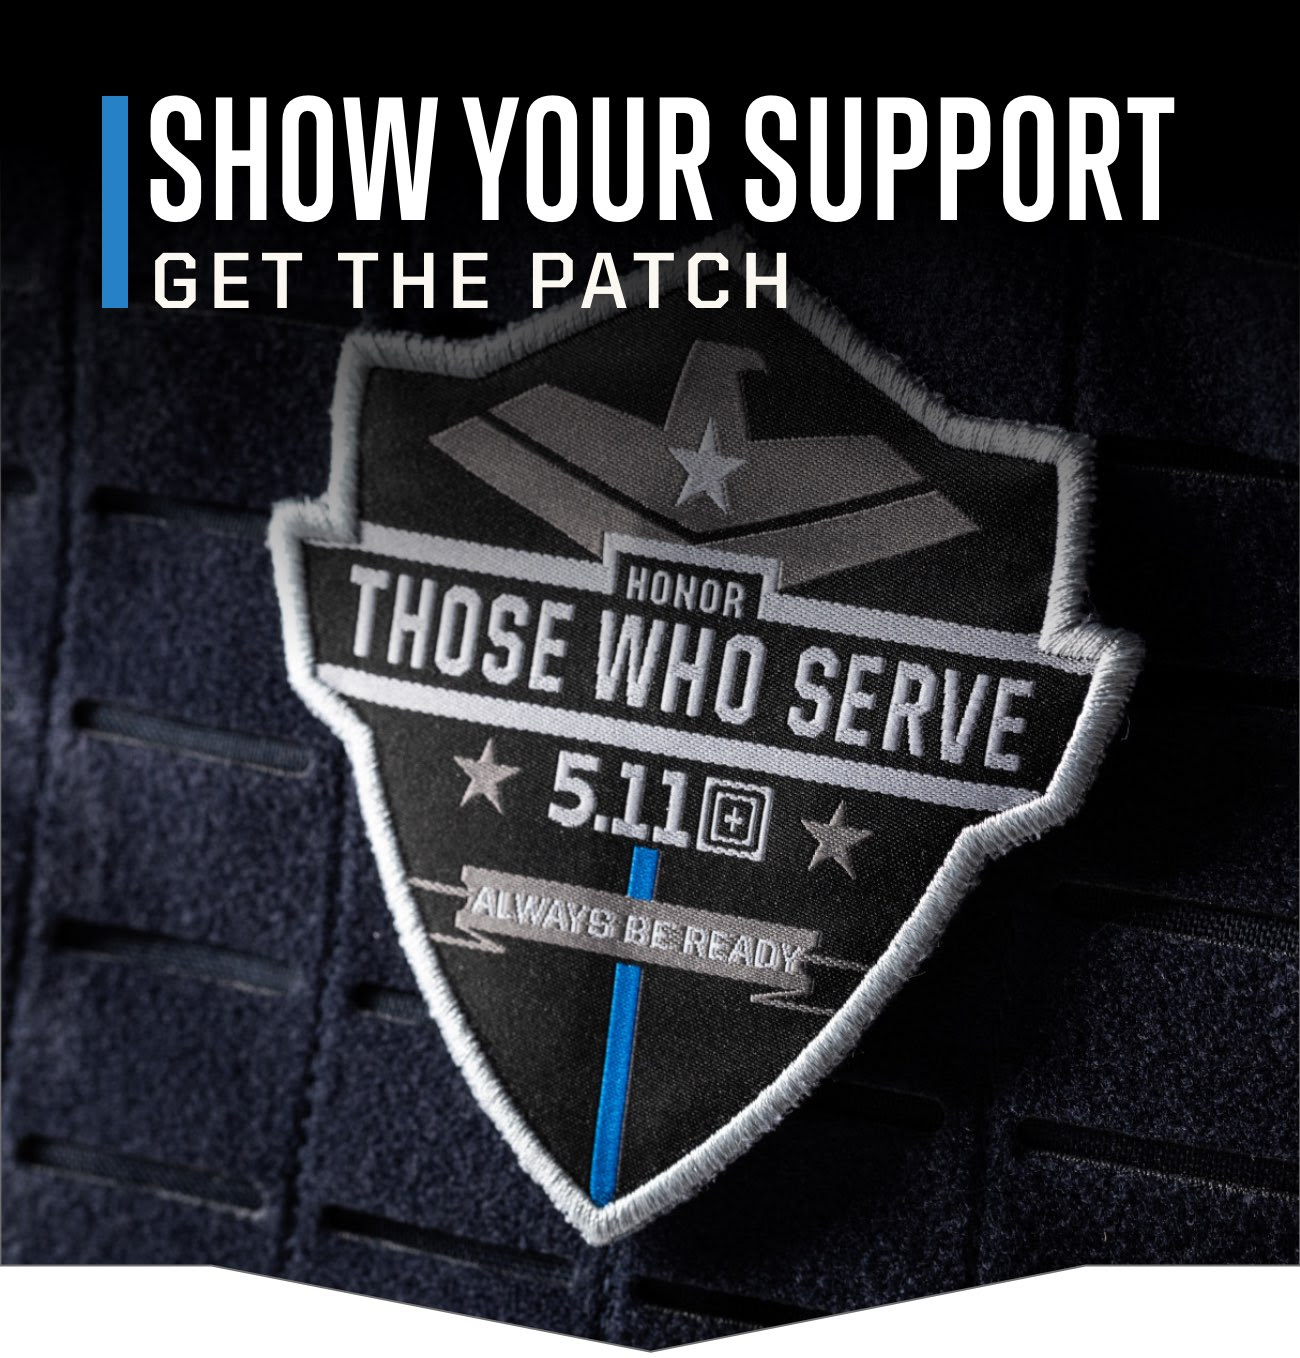 Buy a patch and give back to L...